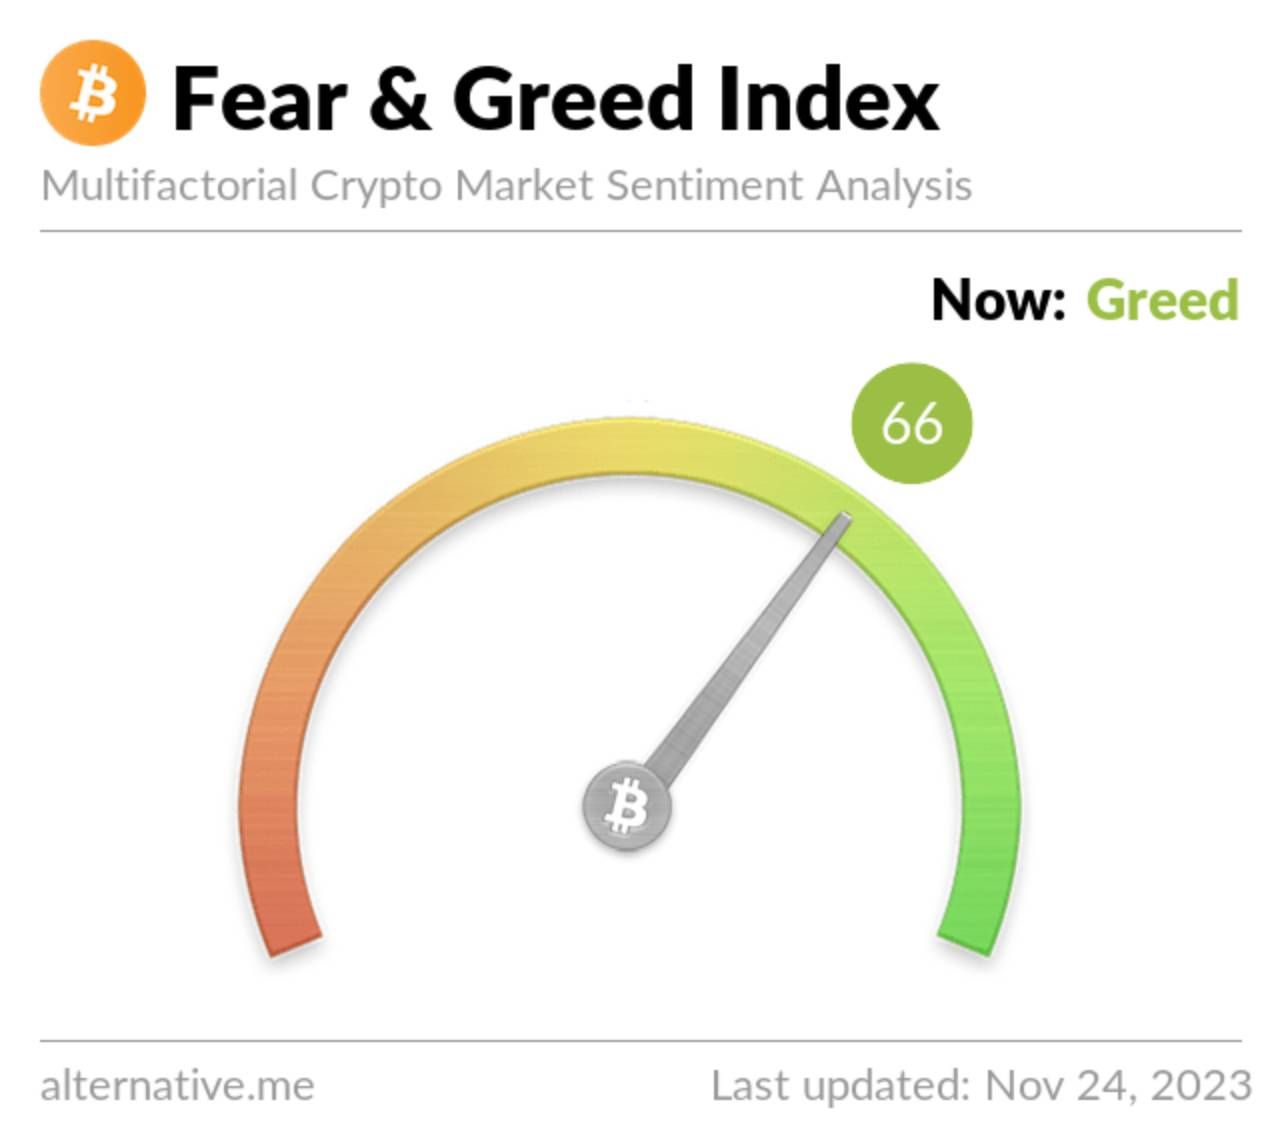 Fear and Greed Index